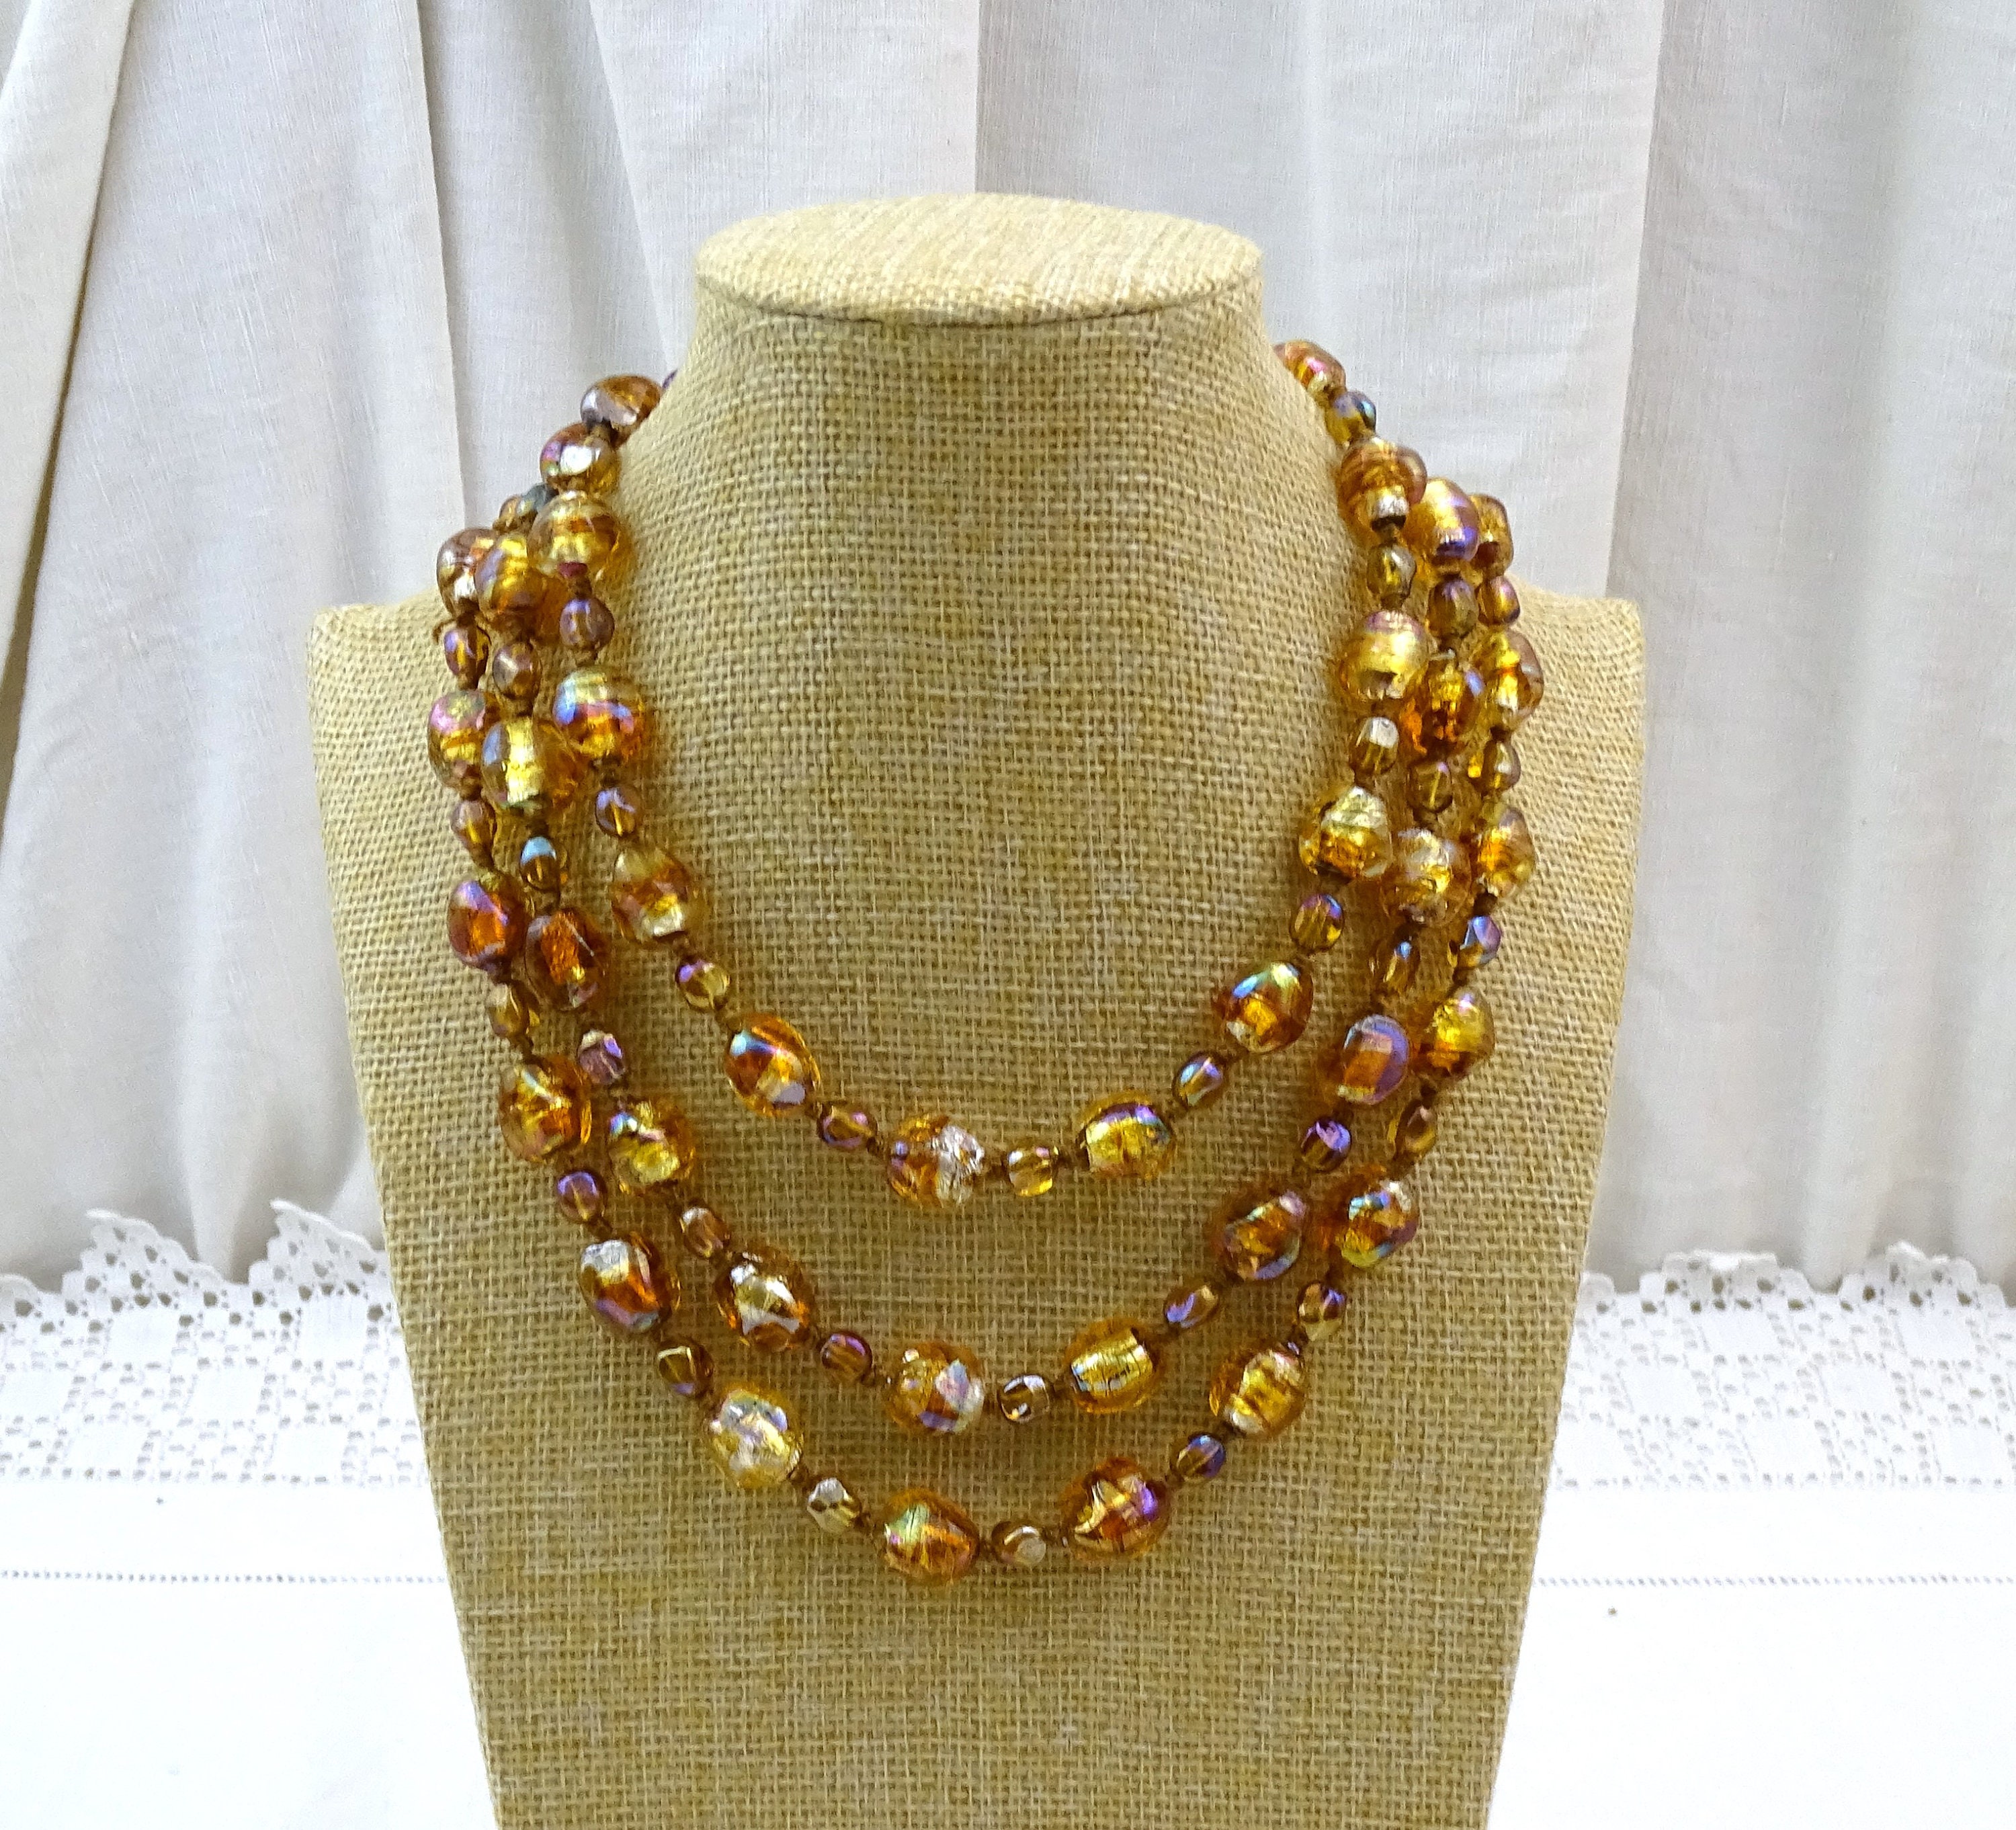 Vintage Fire Foil Uranium Glass Bead Necklace - Rare Gold French Foiled Glass Beads